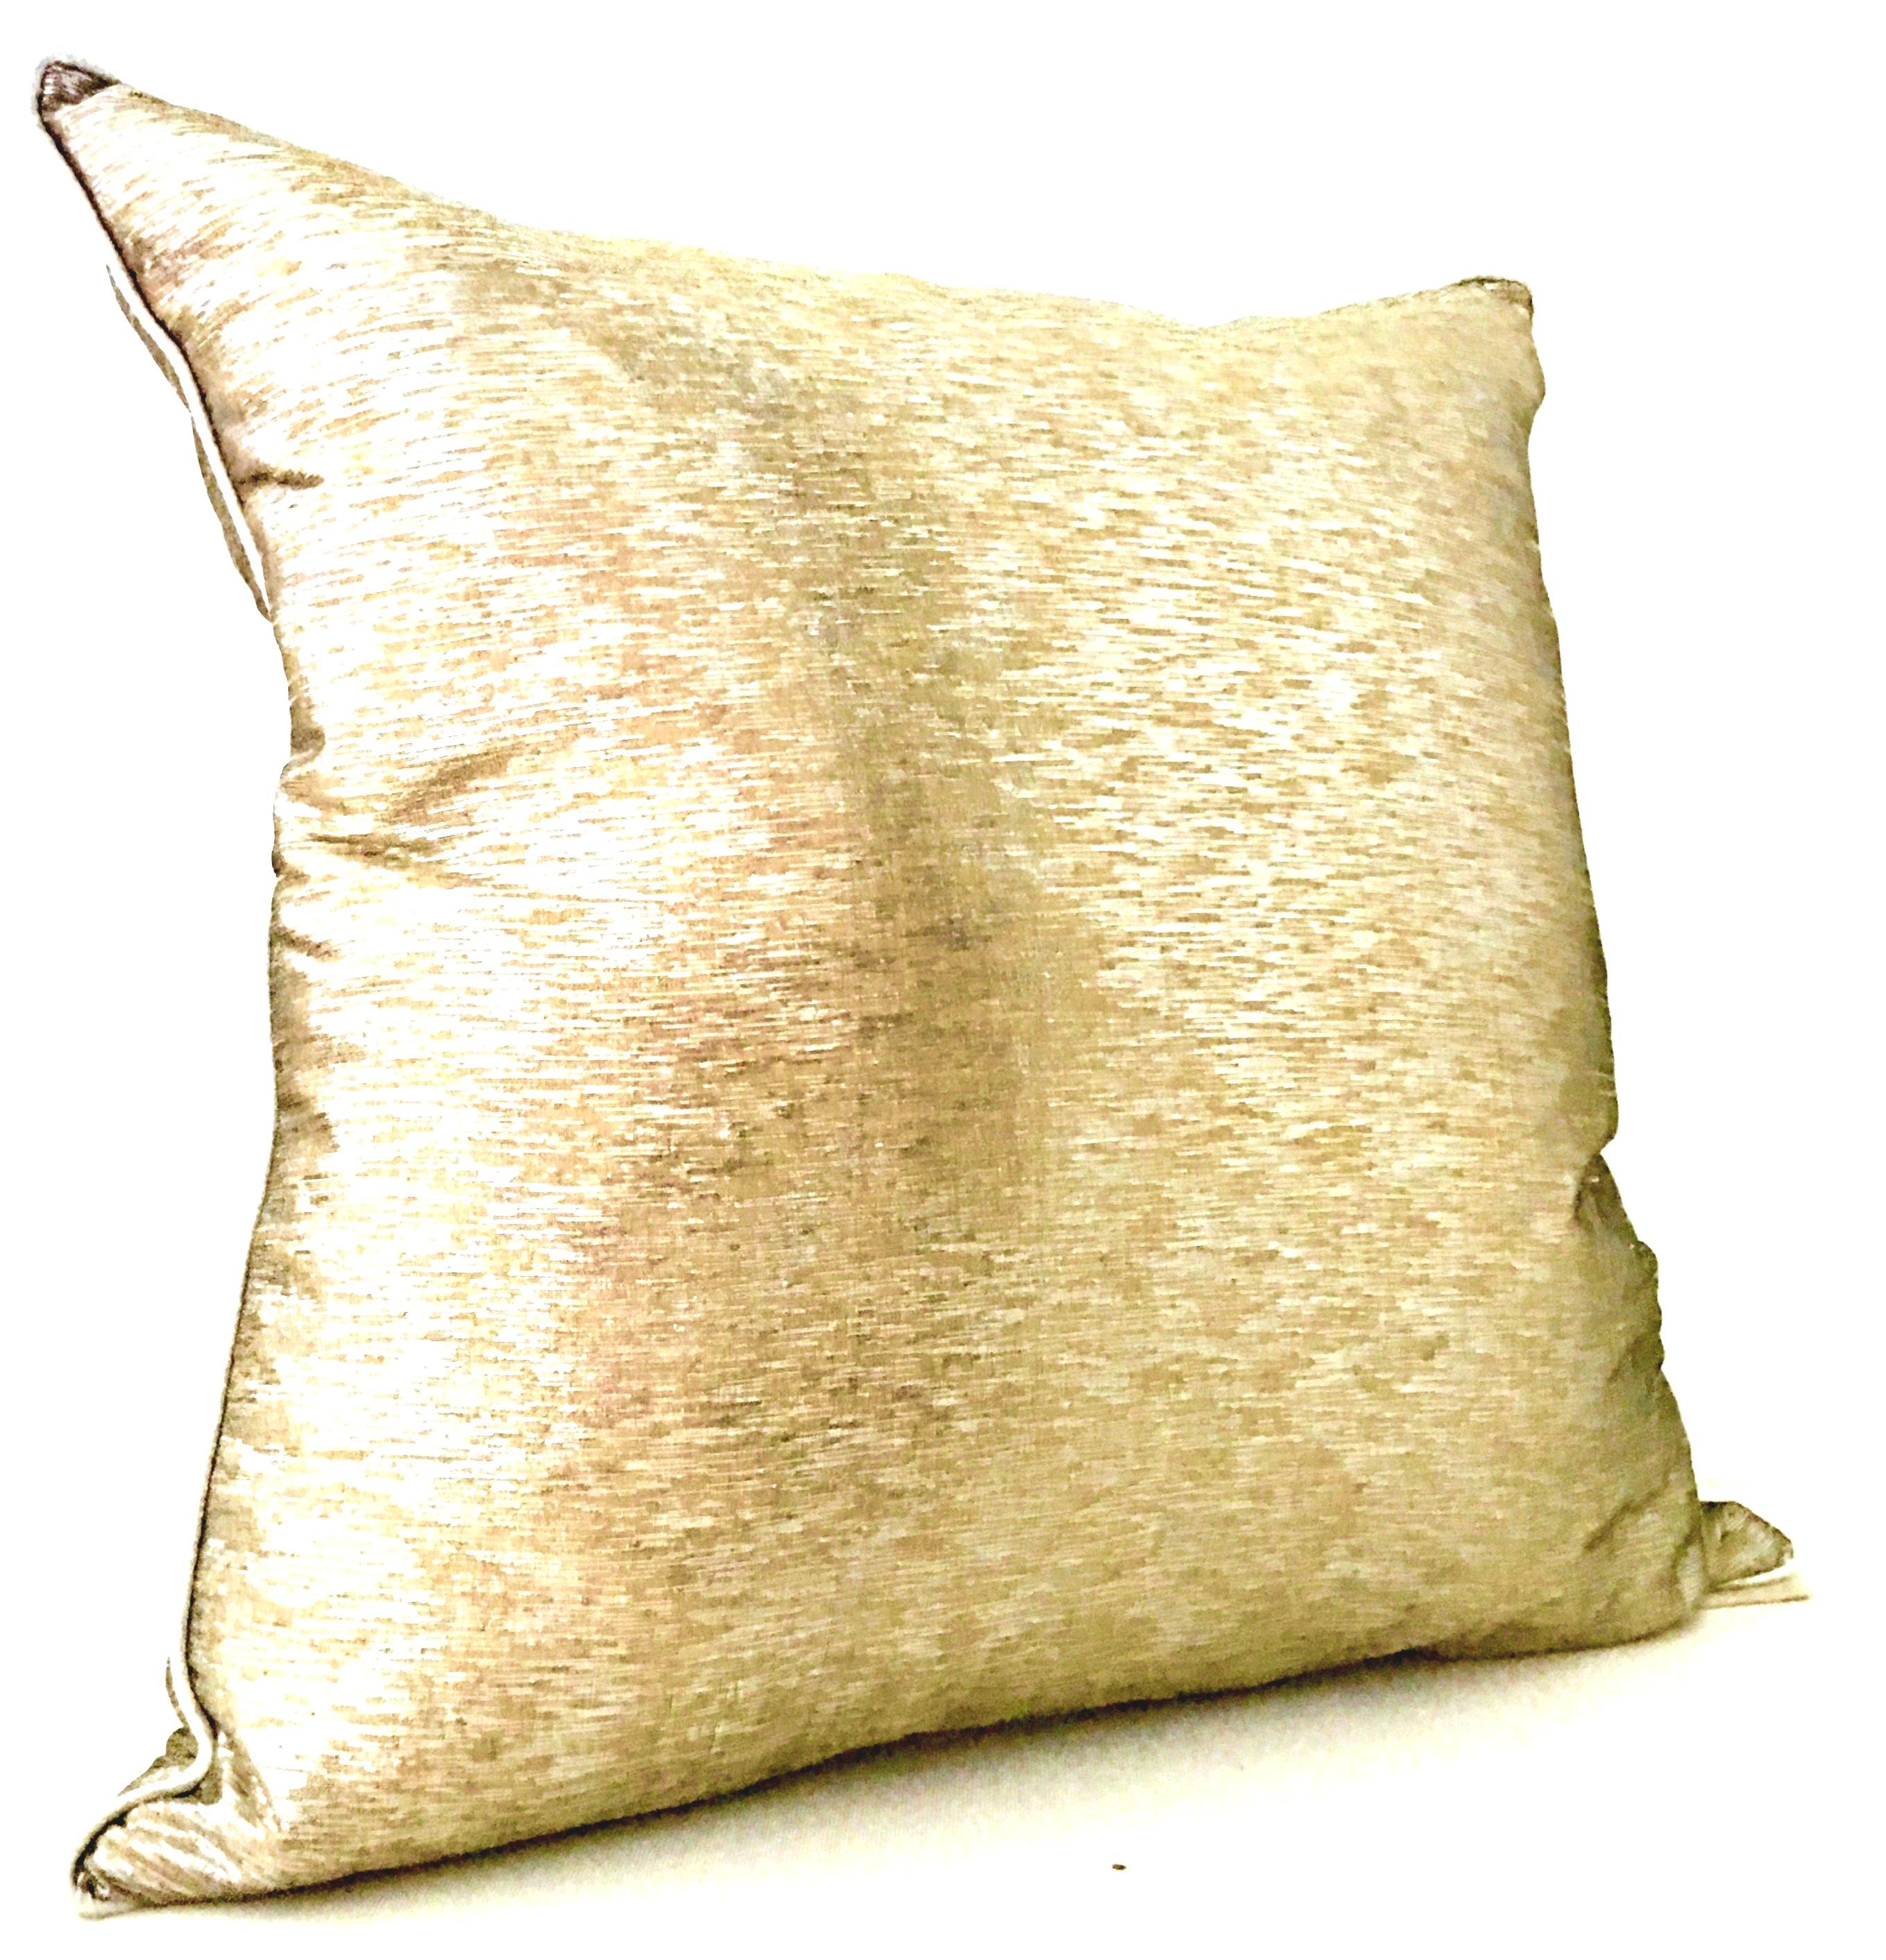 21st Century & New contemporary pair of metallic silk gold and silver down pillows by, Sivaana. Features a silver metallic silk welt. Each pillow has a down and feather combination insert. With a hidden zipper for easy removal. Each pillow has the